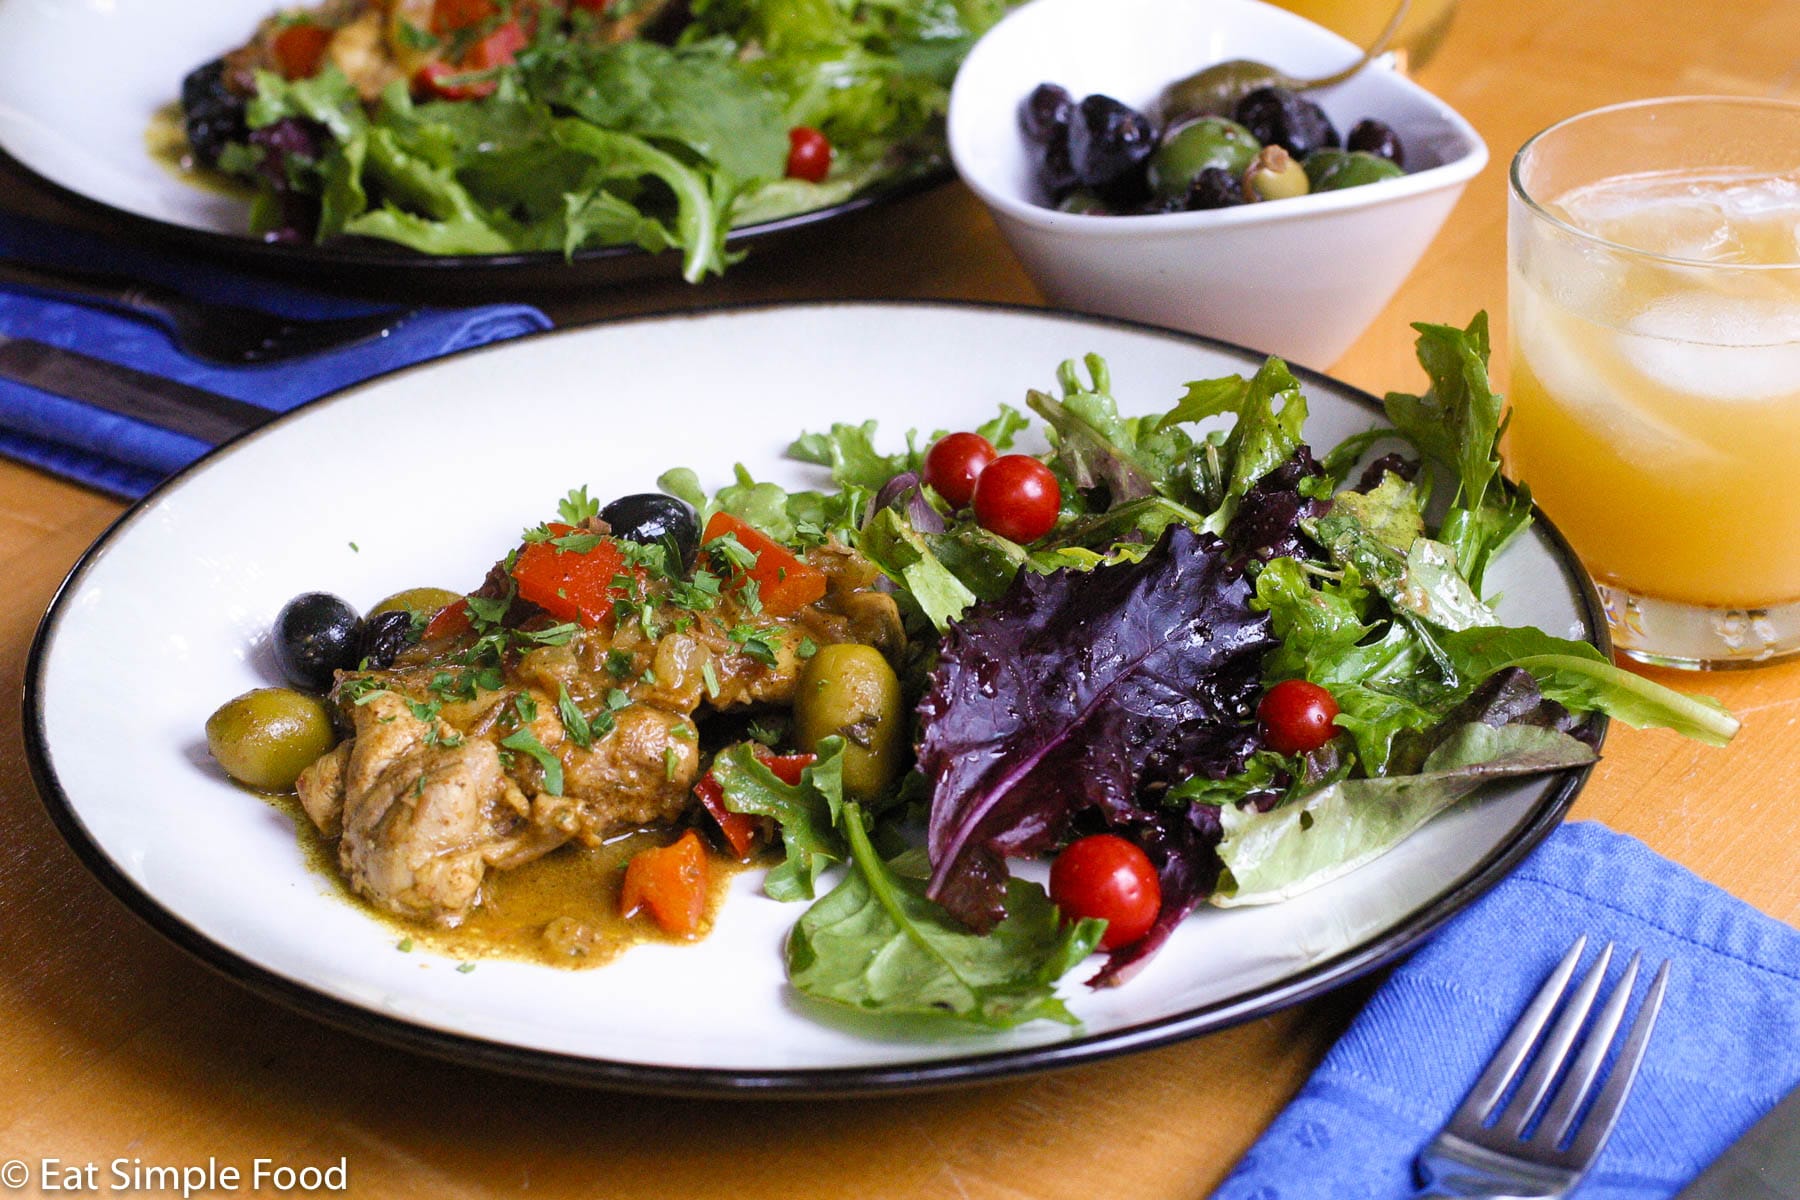 2 plates of browned chicken with brown sauce, chunked red peppers, whole green and black olives and a mixed green and purple salad with whole cherry tomatoes.